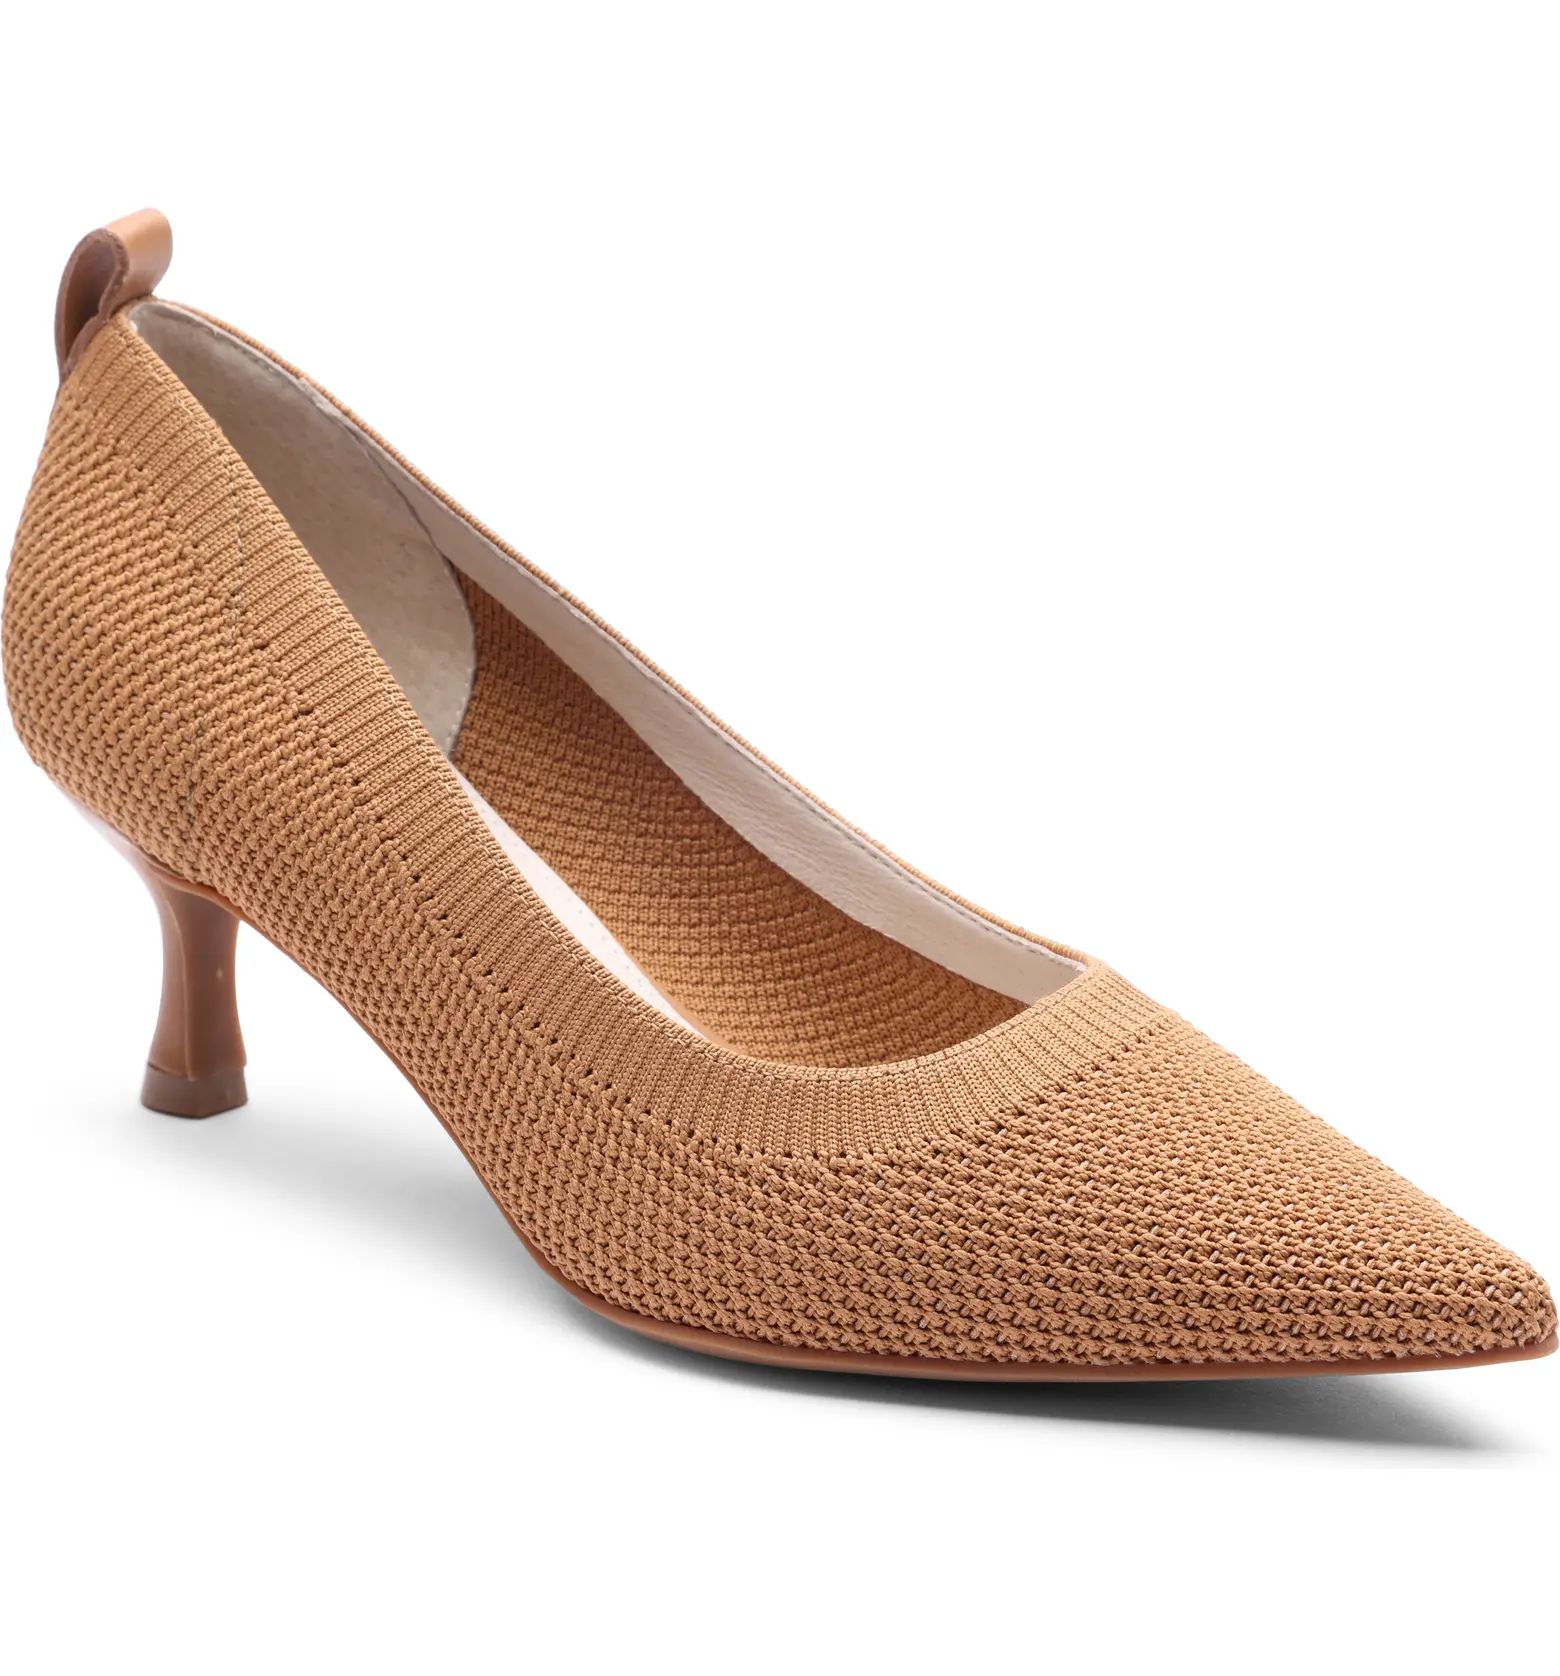 Pep It Up Knit Pointed Toe Pump (Women)SANCTUARY | Nordstrom